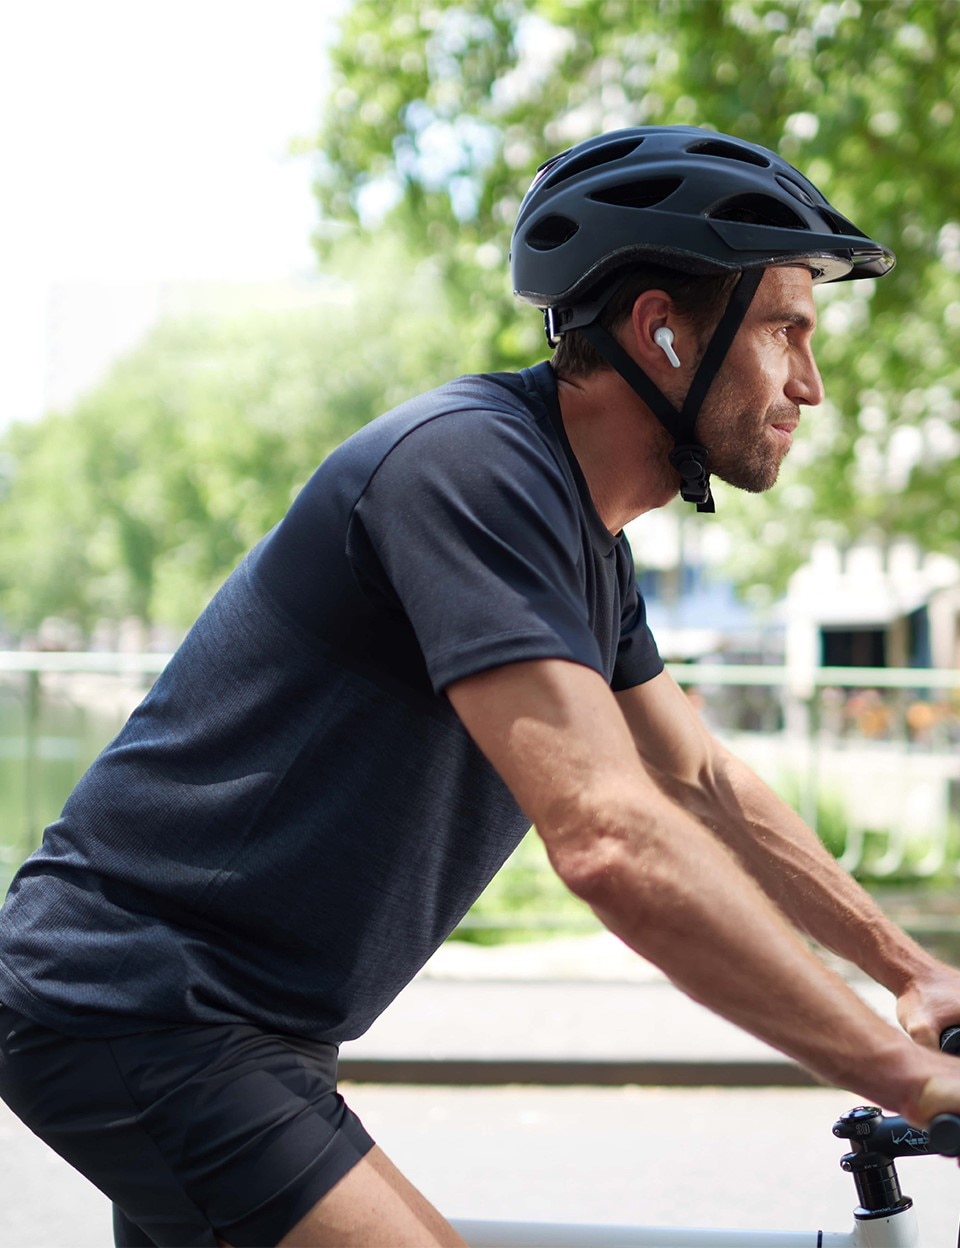 A man cycles using sound earbuds